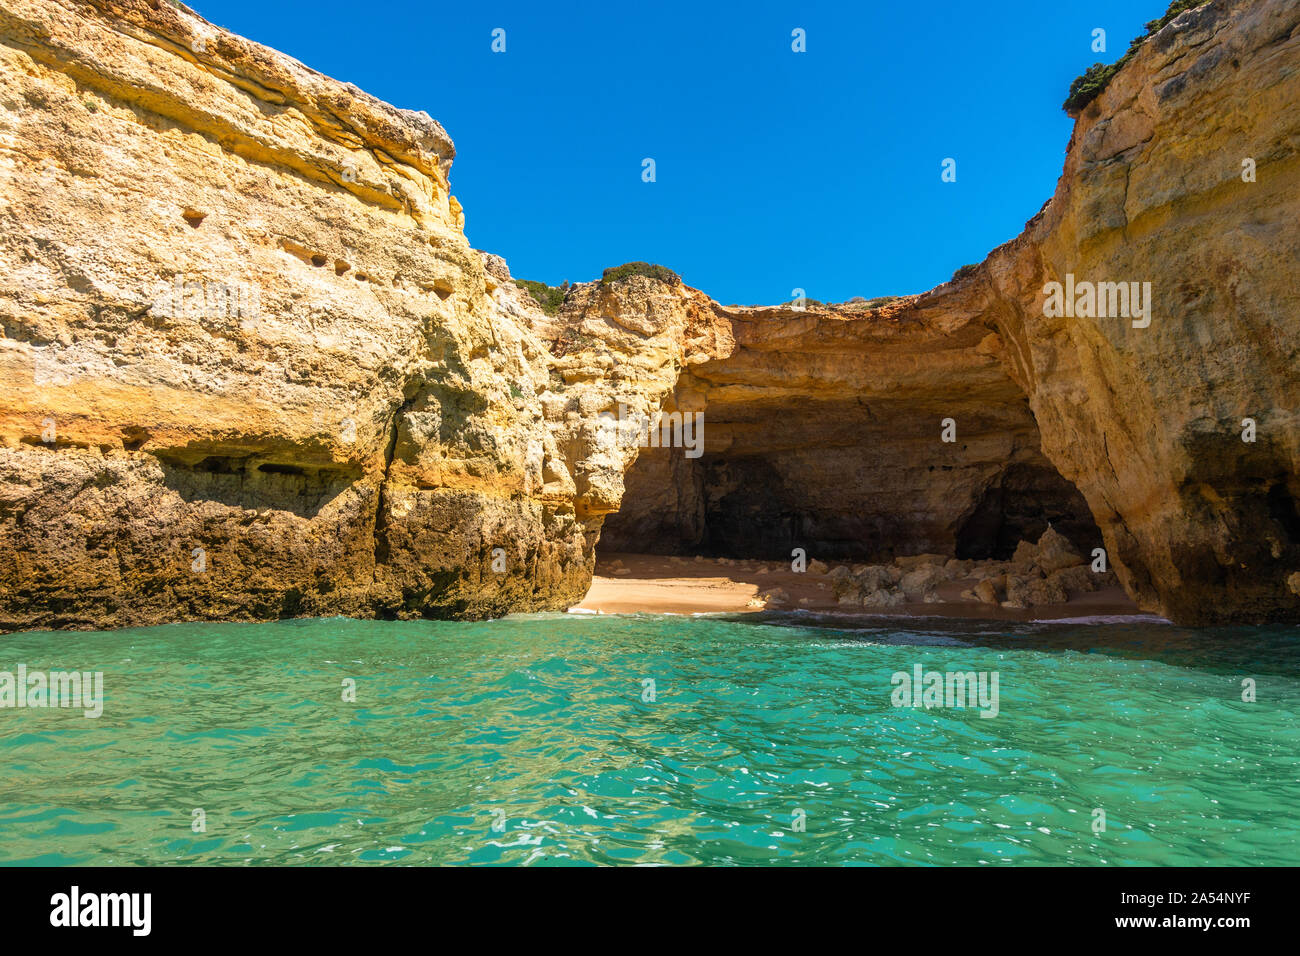 Spectacular cliffs overlooking turquoise sea waters near Benagil cave viewed from a boat, Algarve, Portugal Stock Photo